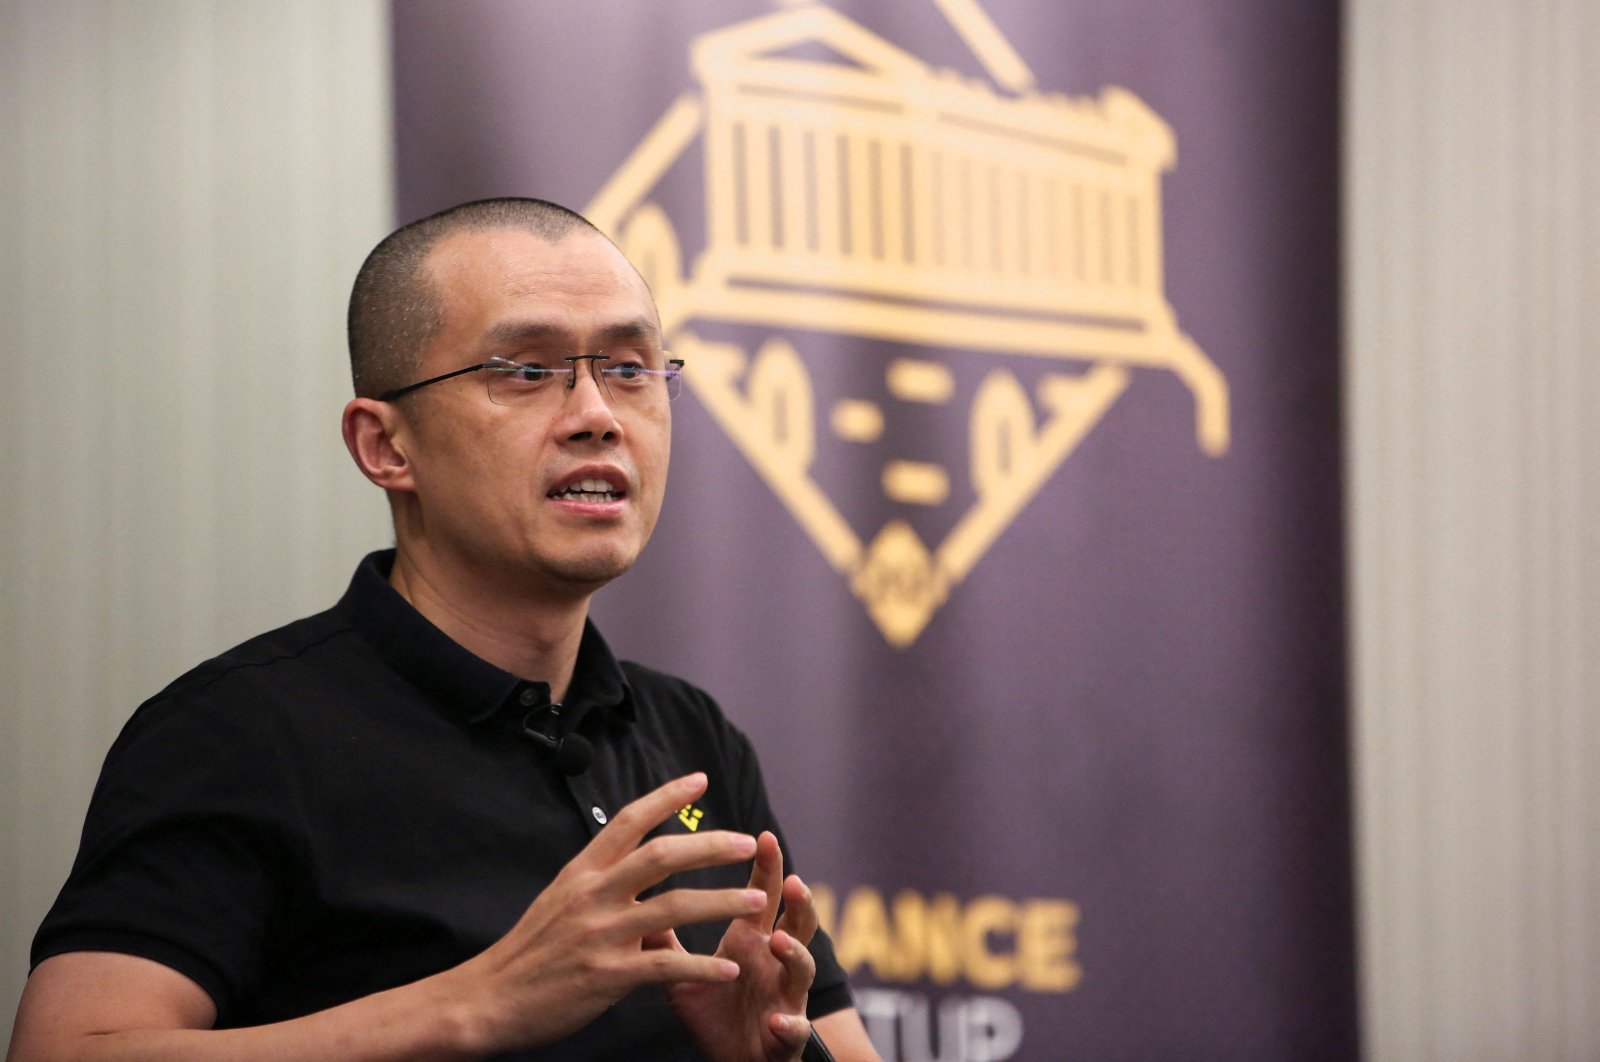 Zhao Changpeng, founder and, at the time, chief executive officer of Binance, speaks during an event in Athens, Greece, Nov. 25, 2022. (Reuters Photo)